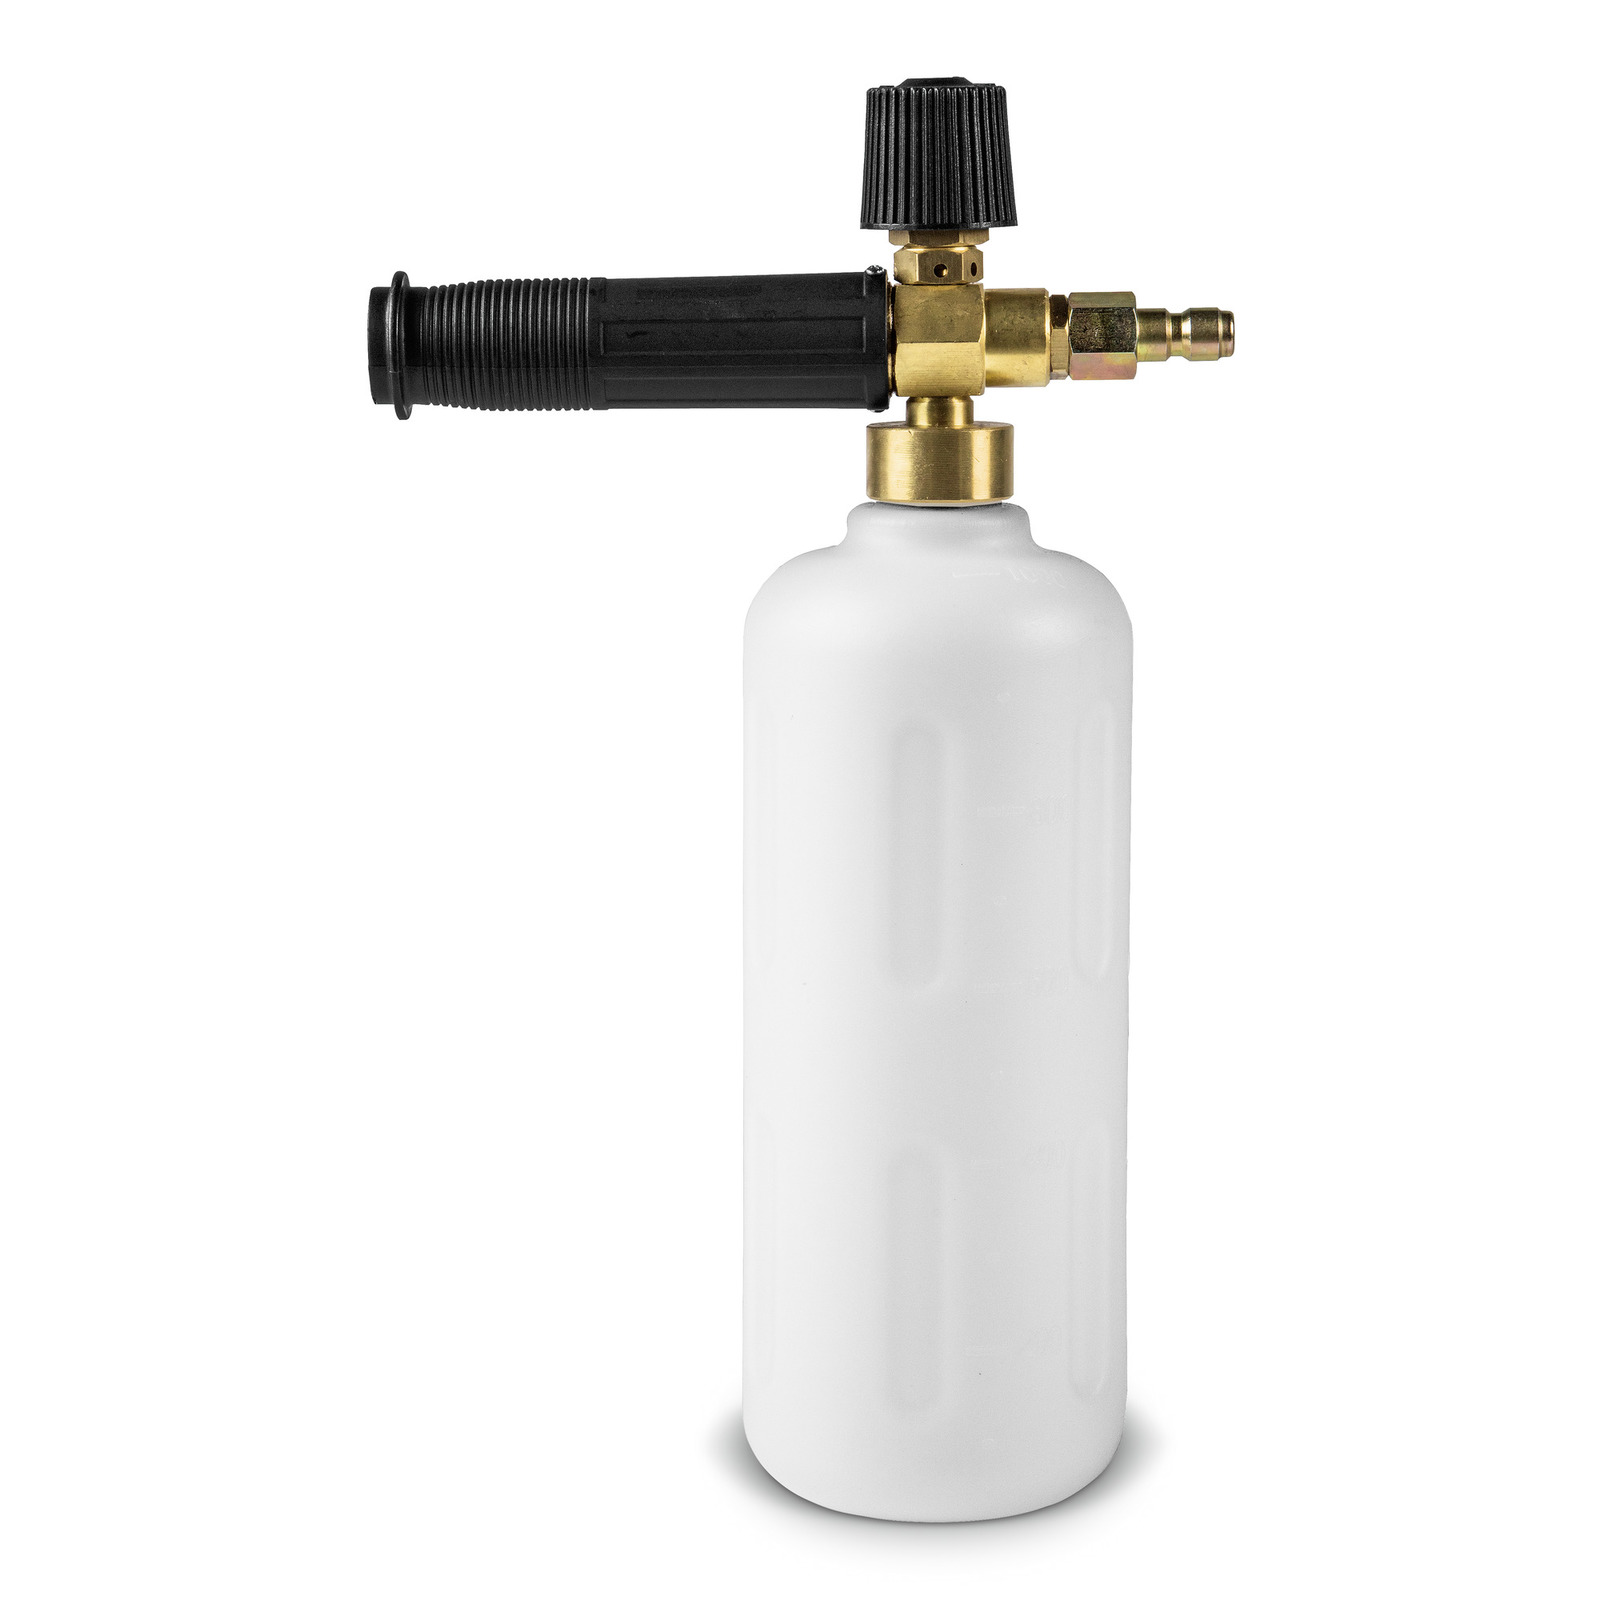 Twinkle Star Foam Cannon 1 L Bottle Snow Foam Lance with 1/4 Quick Connector, 5 Nozzle Tips for Pressure Washer